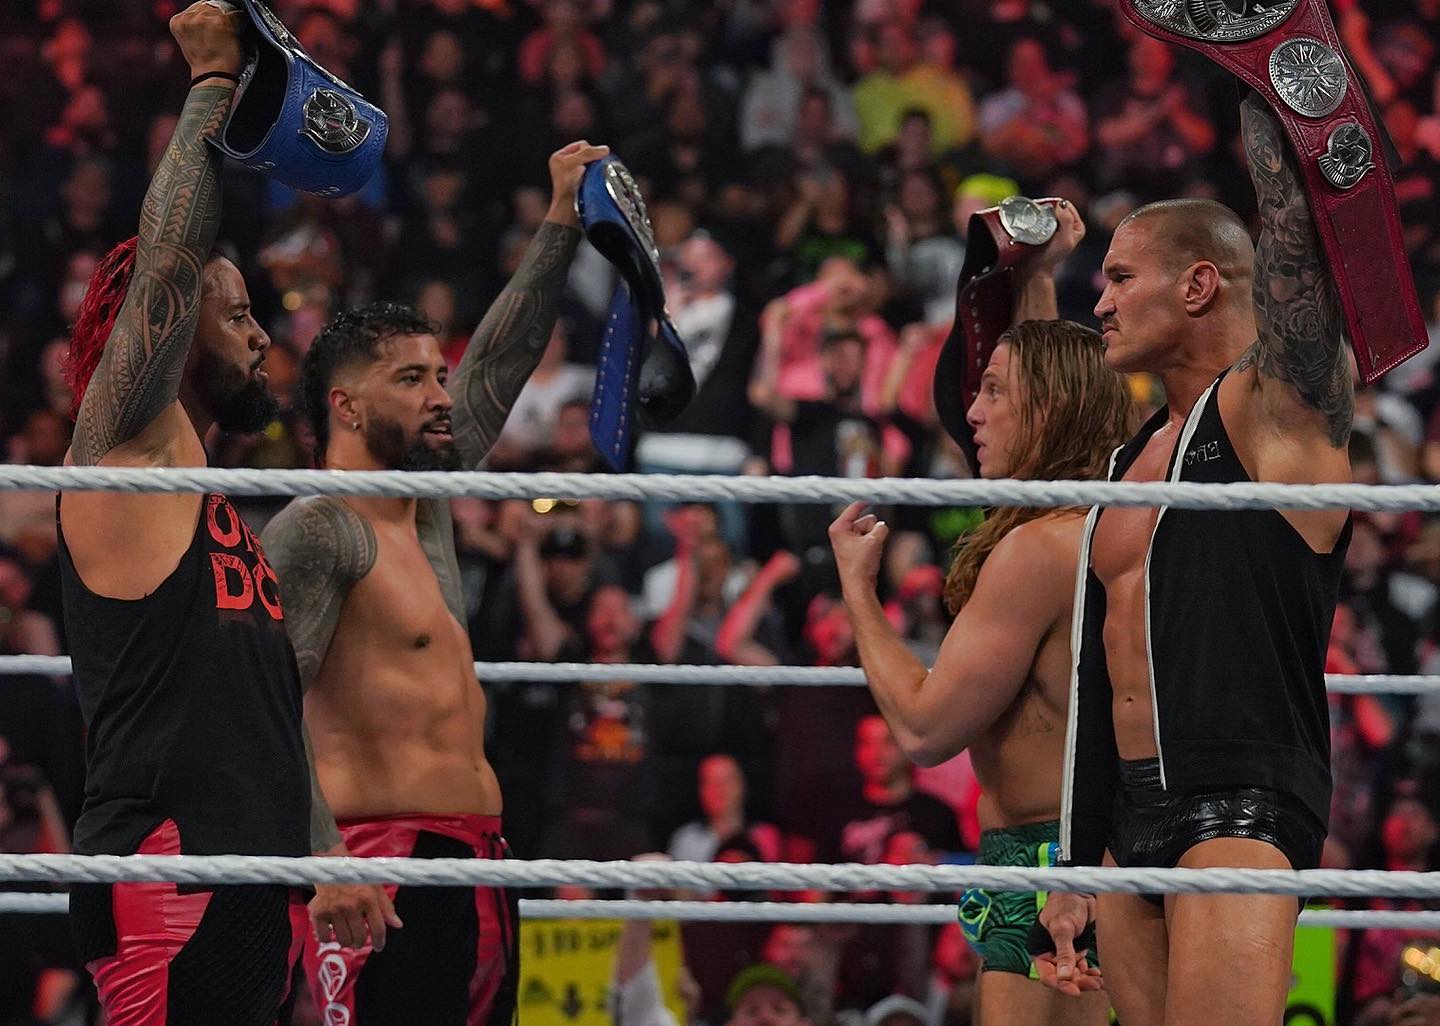 Randy Orton and Riddle (Raw Tag Team Champions) face to face with The Usos (SmackDown Tag Team Champions)